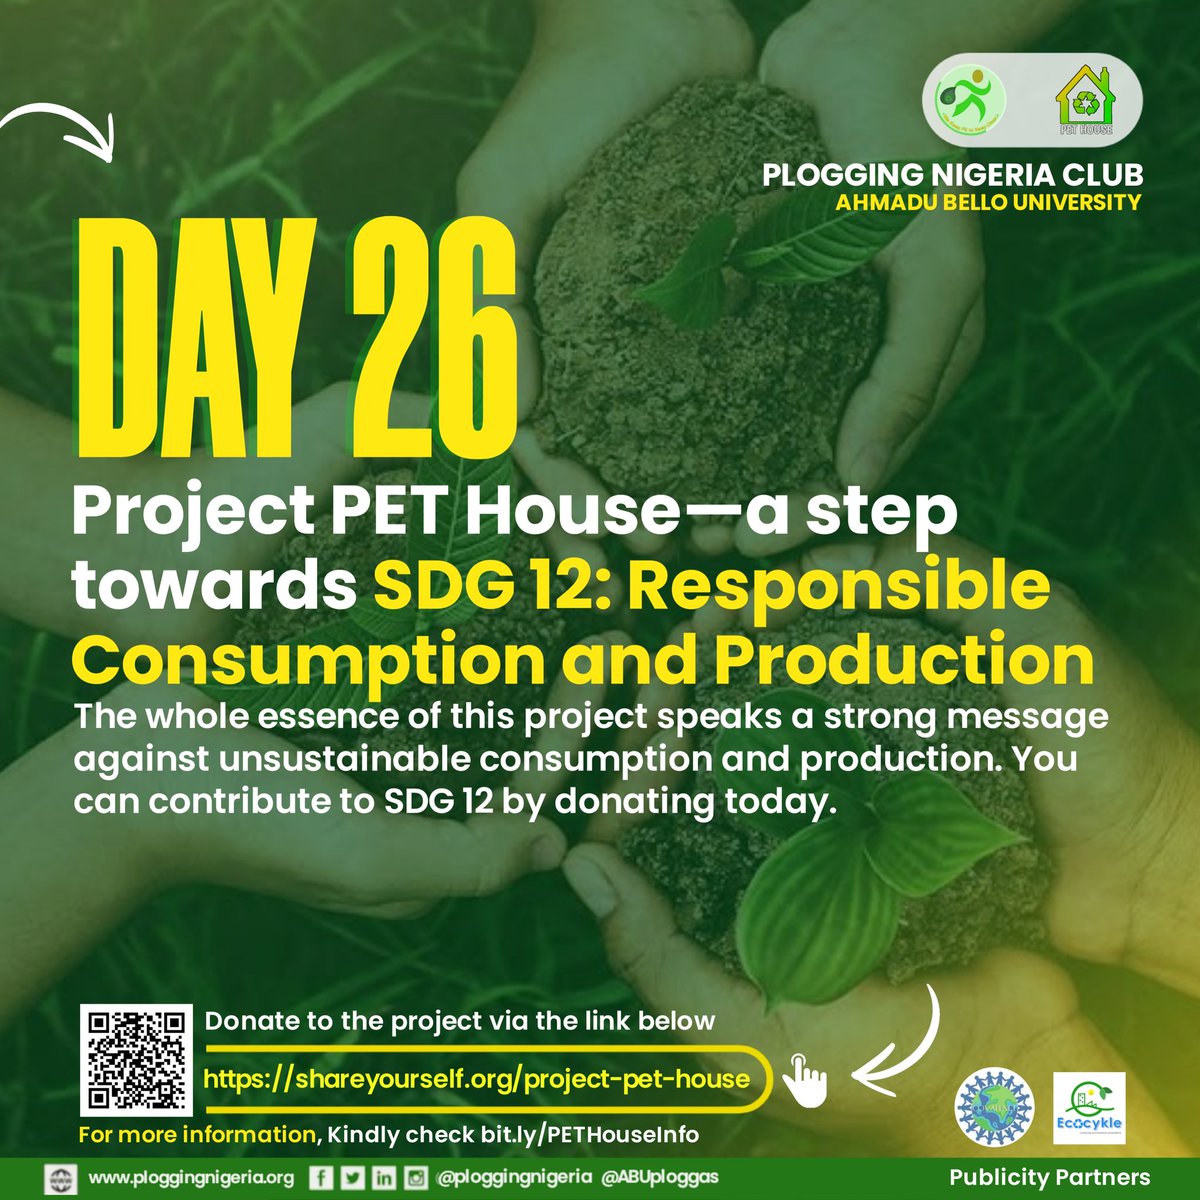 By retrieving and repurposing dumped plastic bottles, Project PET House will foster #SDG12 by promoting a culture of Responsible Consumption and Production. 

You can aid this project and support #SDG12 by donating today: shareyourself.org/project-pet-ho…

#Bottles4Bricks
#ProjectPETHouse